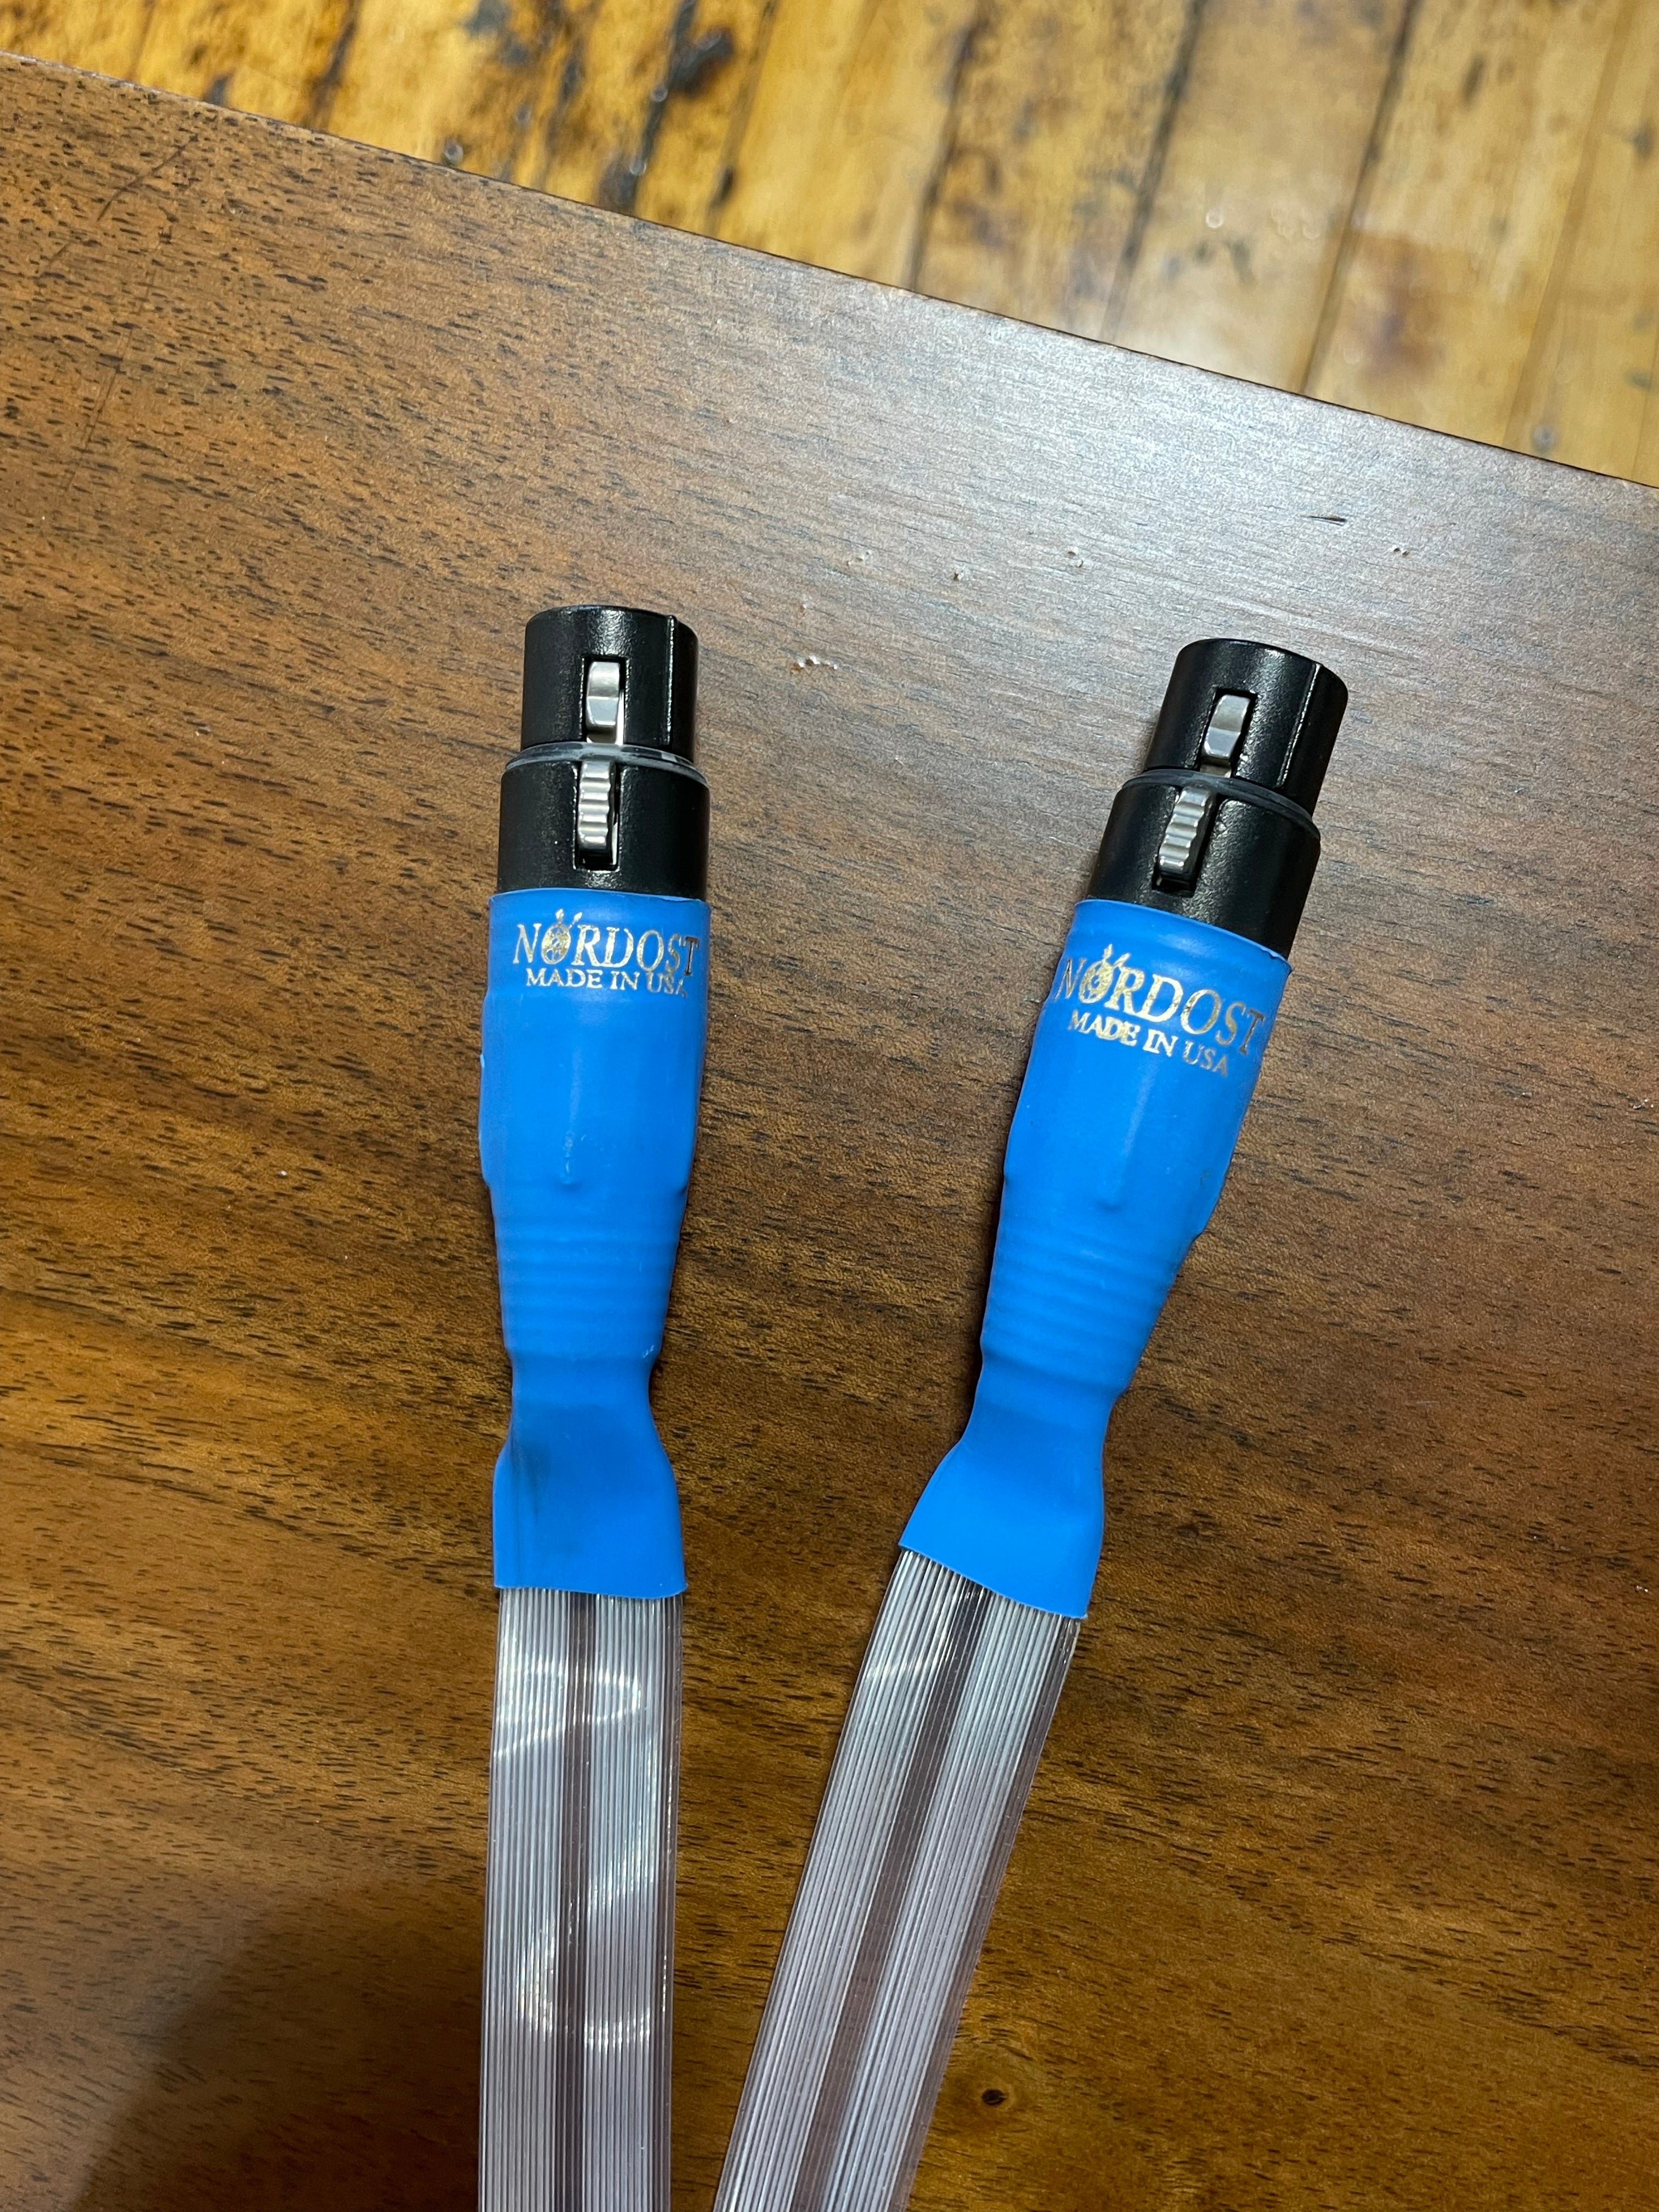 Nordost Blue Heaven XLR Interconnects, Two 1m Pair Available